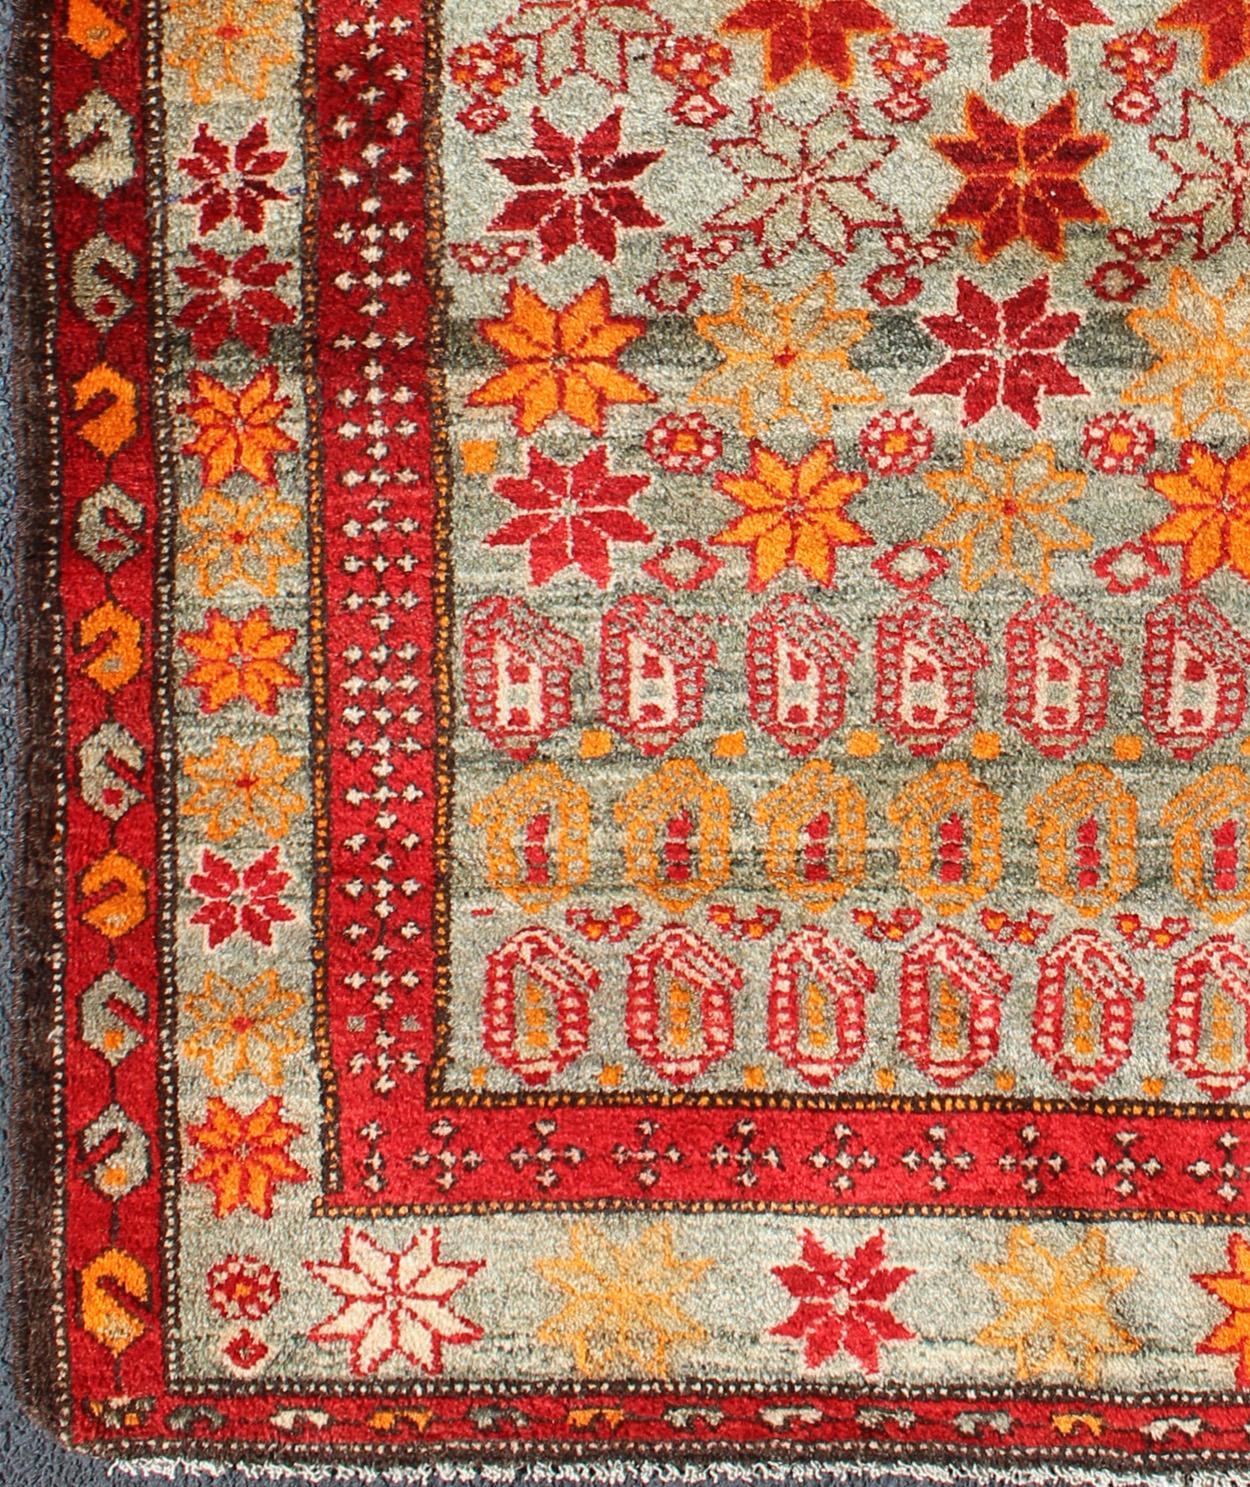 Persian Hamedan vintage rug with flower geometric design in red, orange, and gray tones, rug ema-7586, country of origin / type: Iran / Hamedan, circa 1930.

This magnificent antique Hamedan features beautiful coloration, including tones of